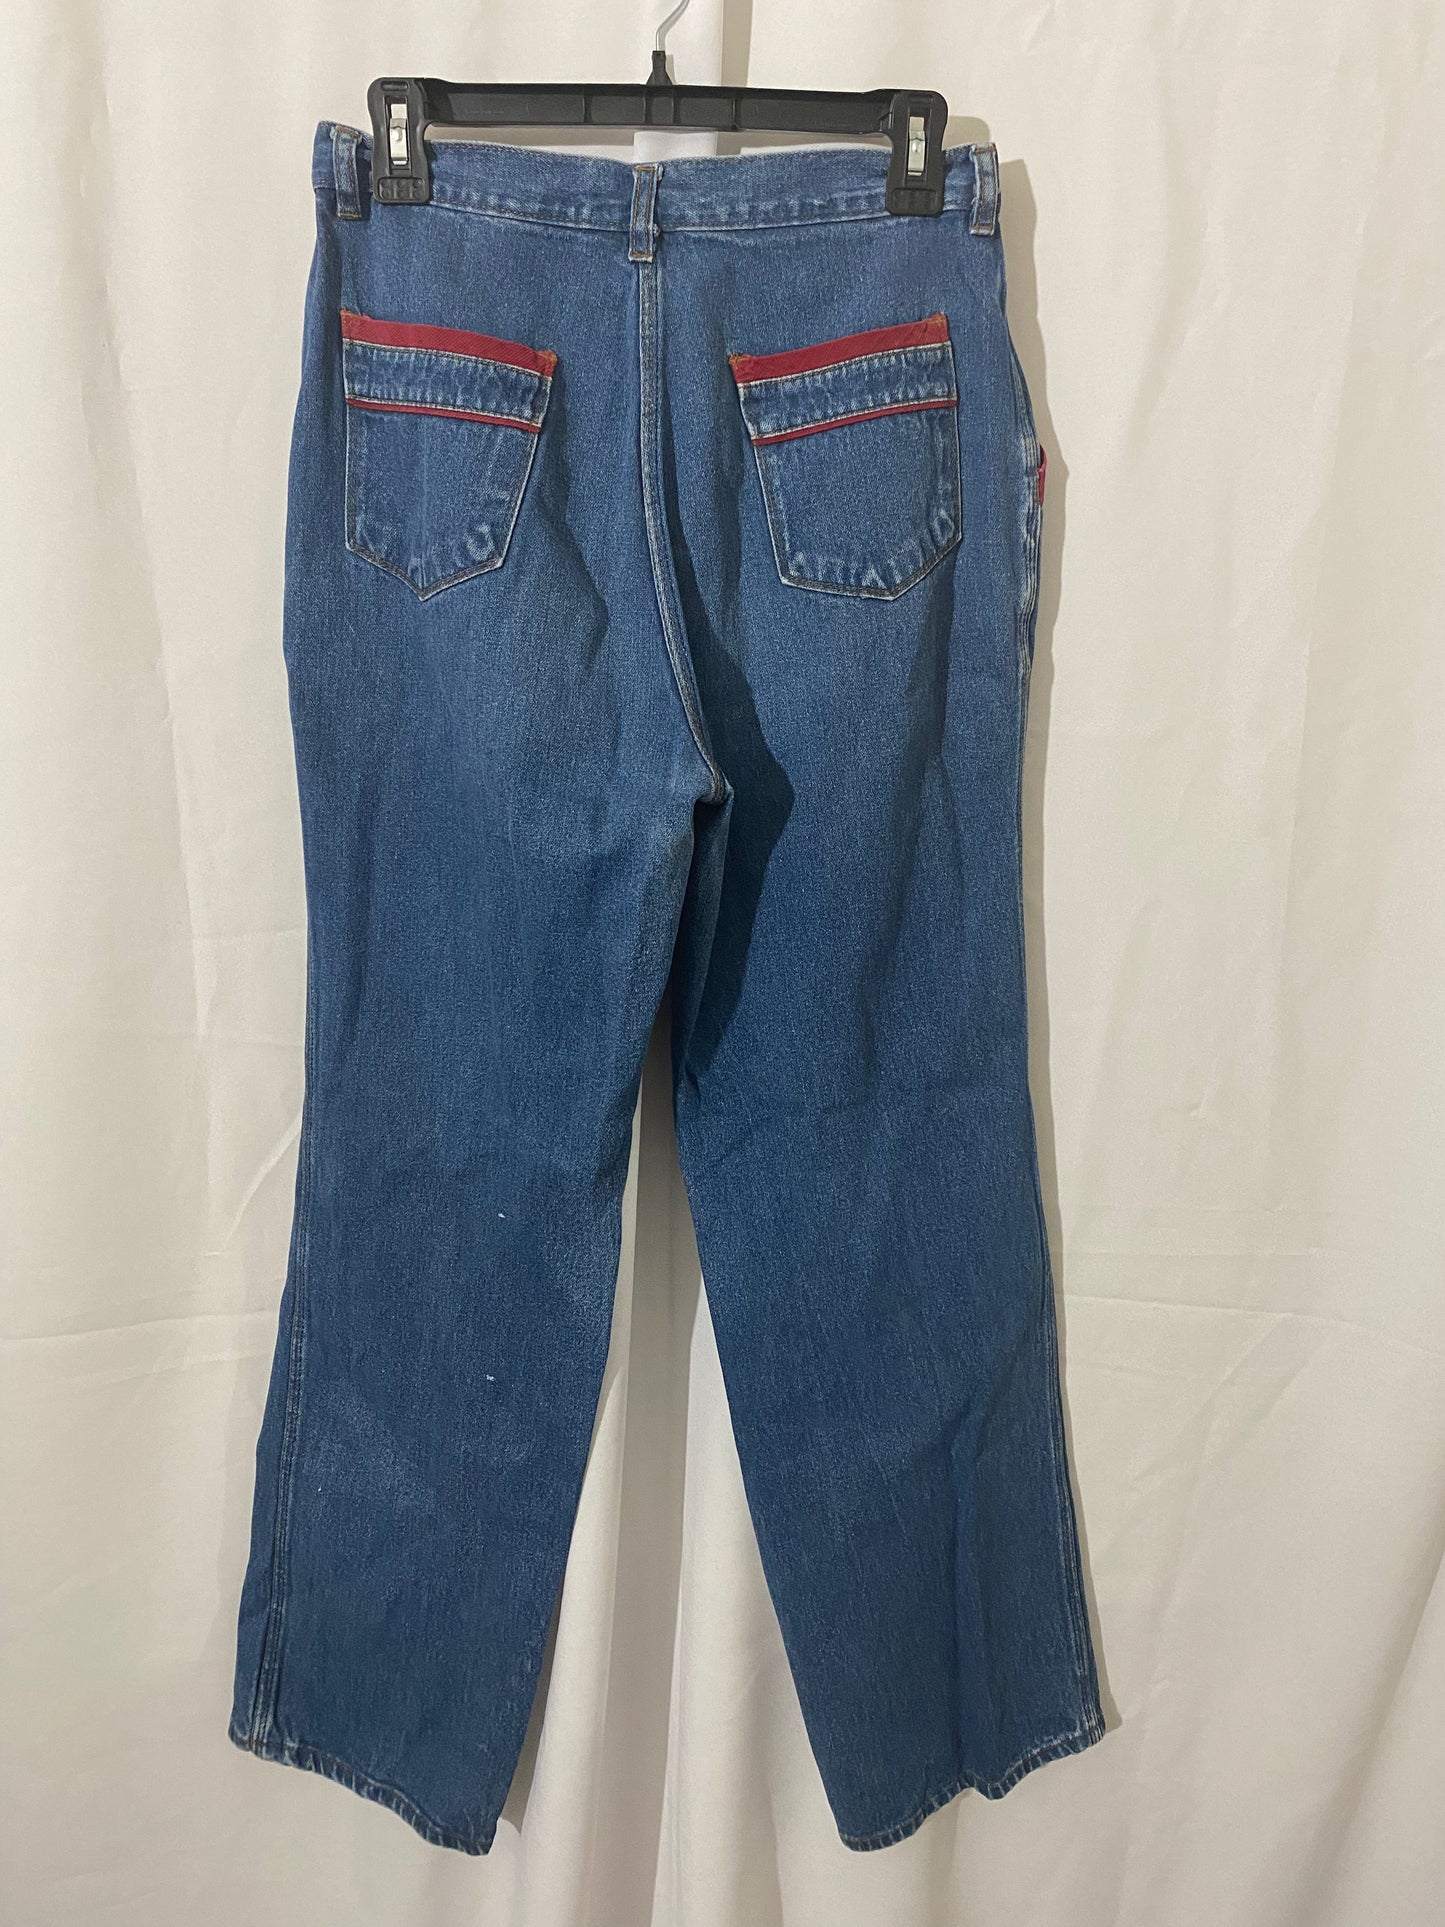 Jeans with Maroon Corduroy on Pockets